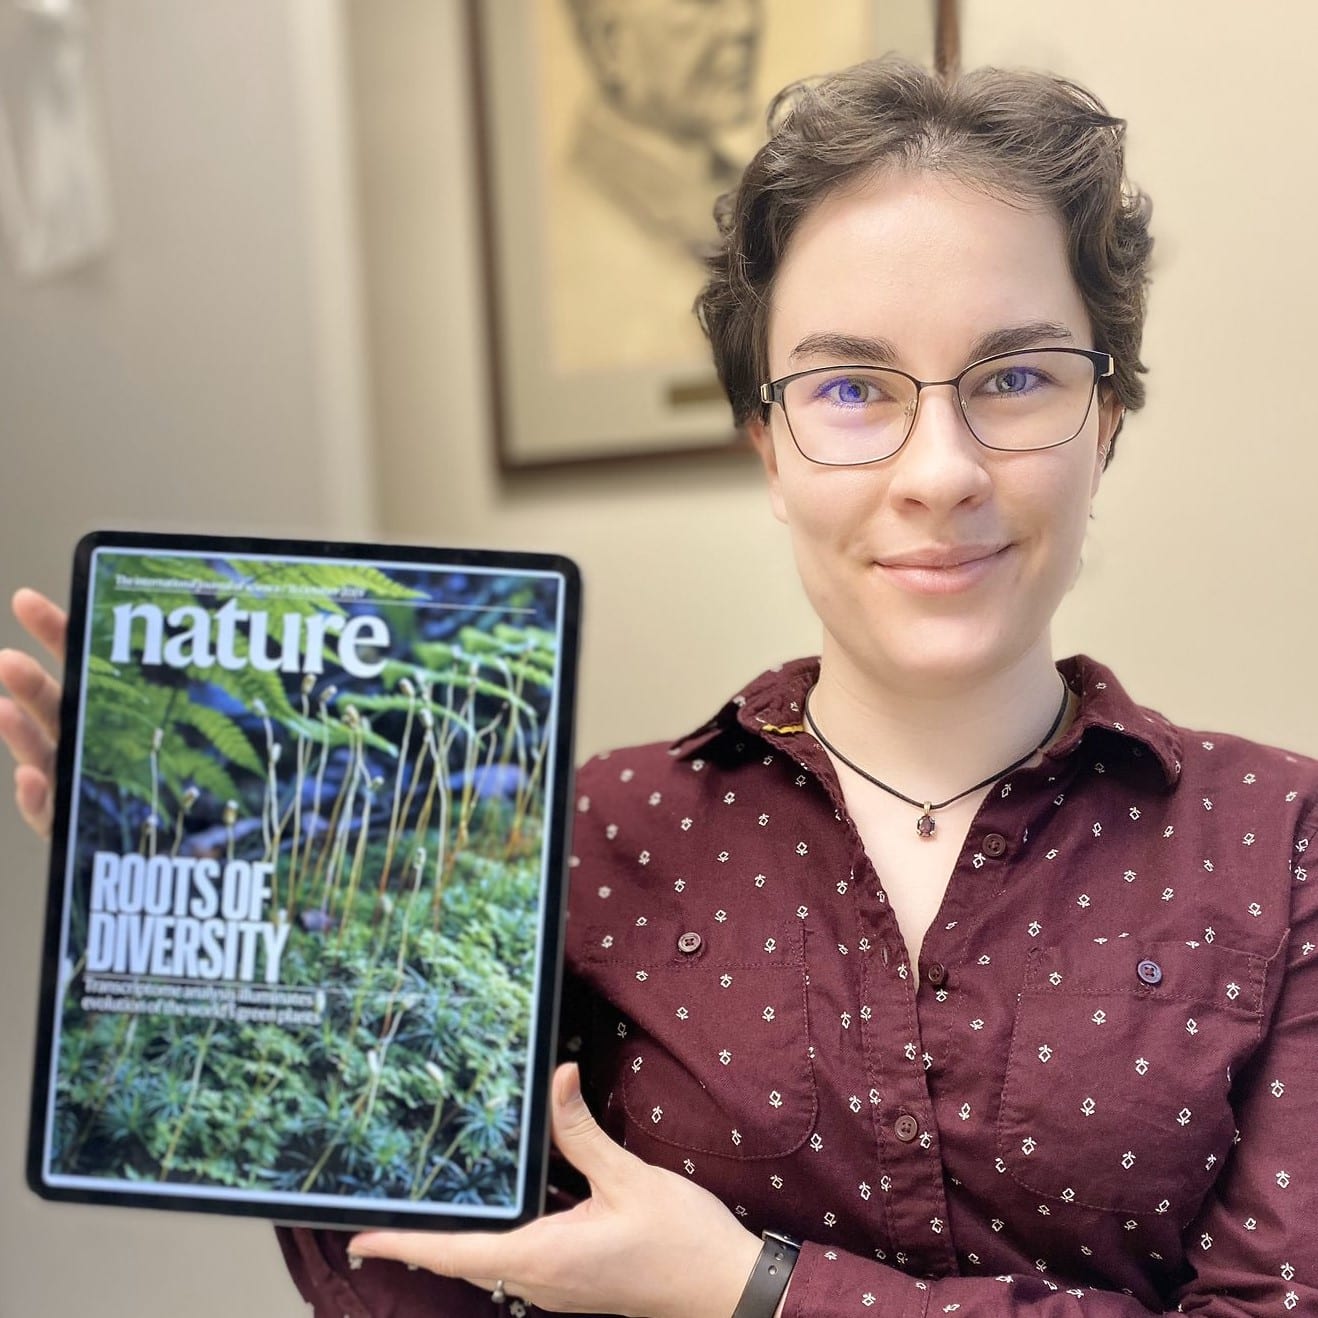 BTI graduate student Alaina Petlewski displays the October 31 issue of Nature, for which she took the cover photo.